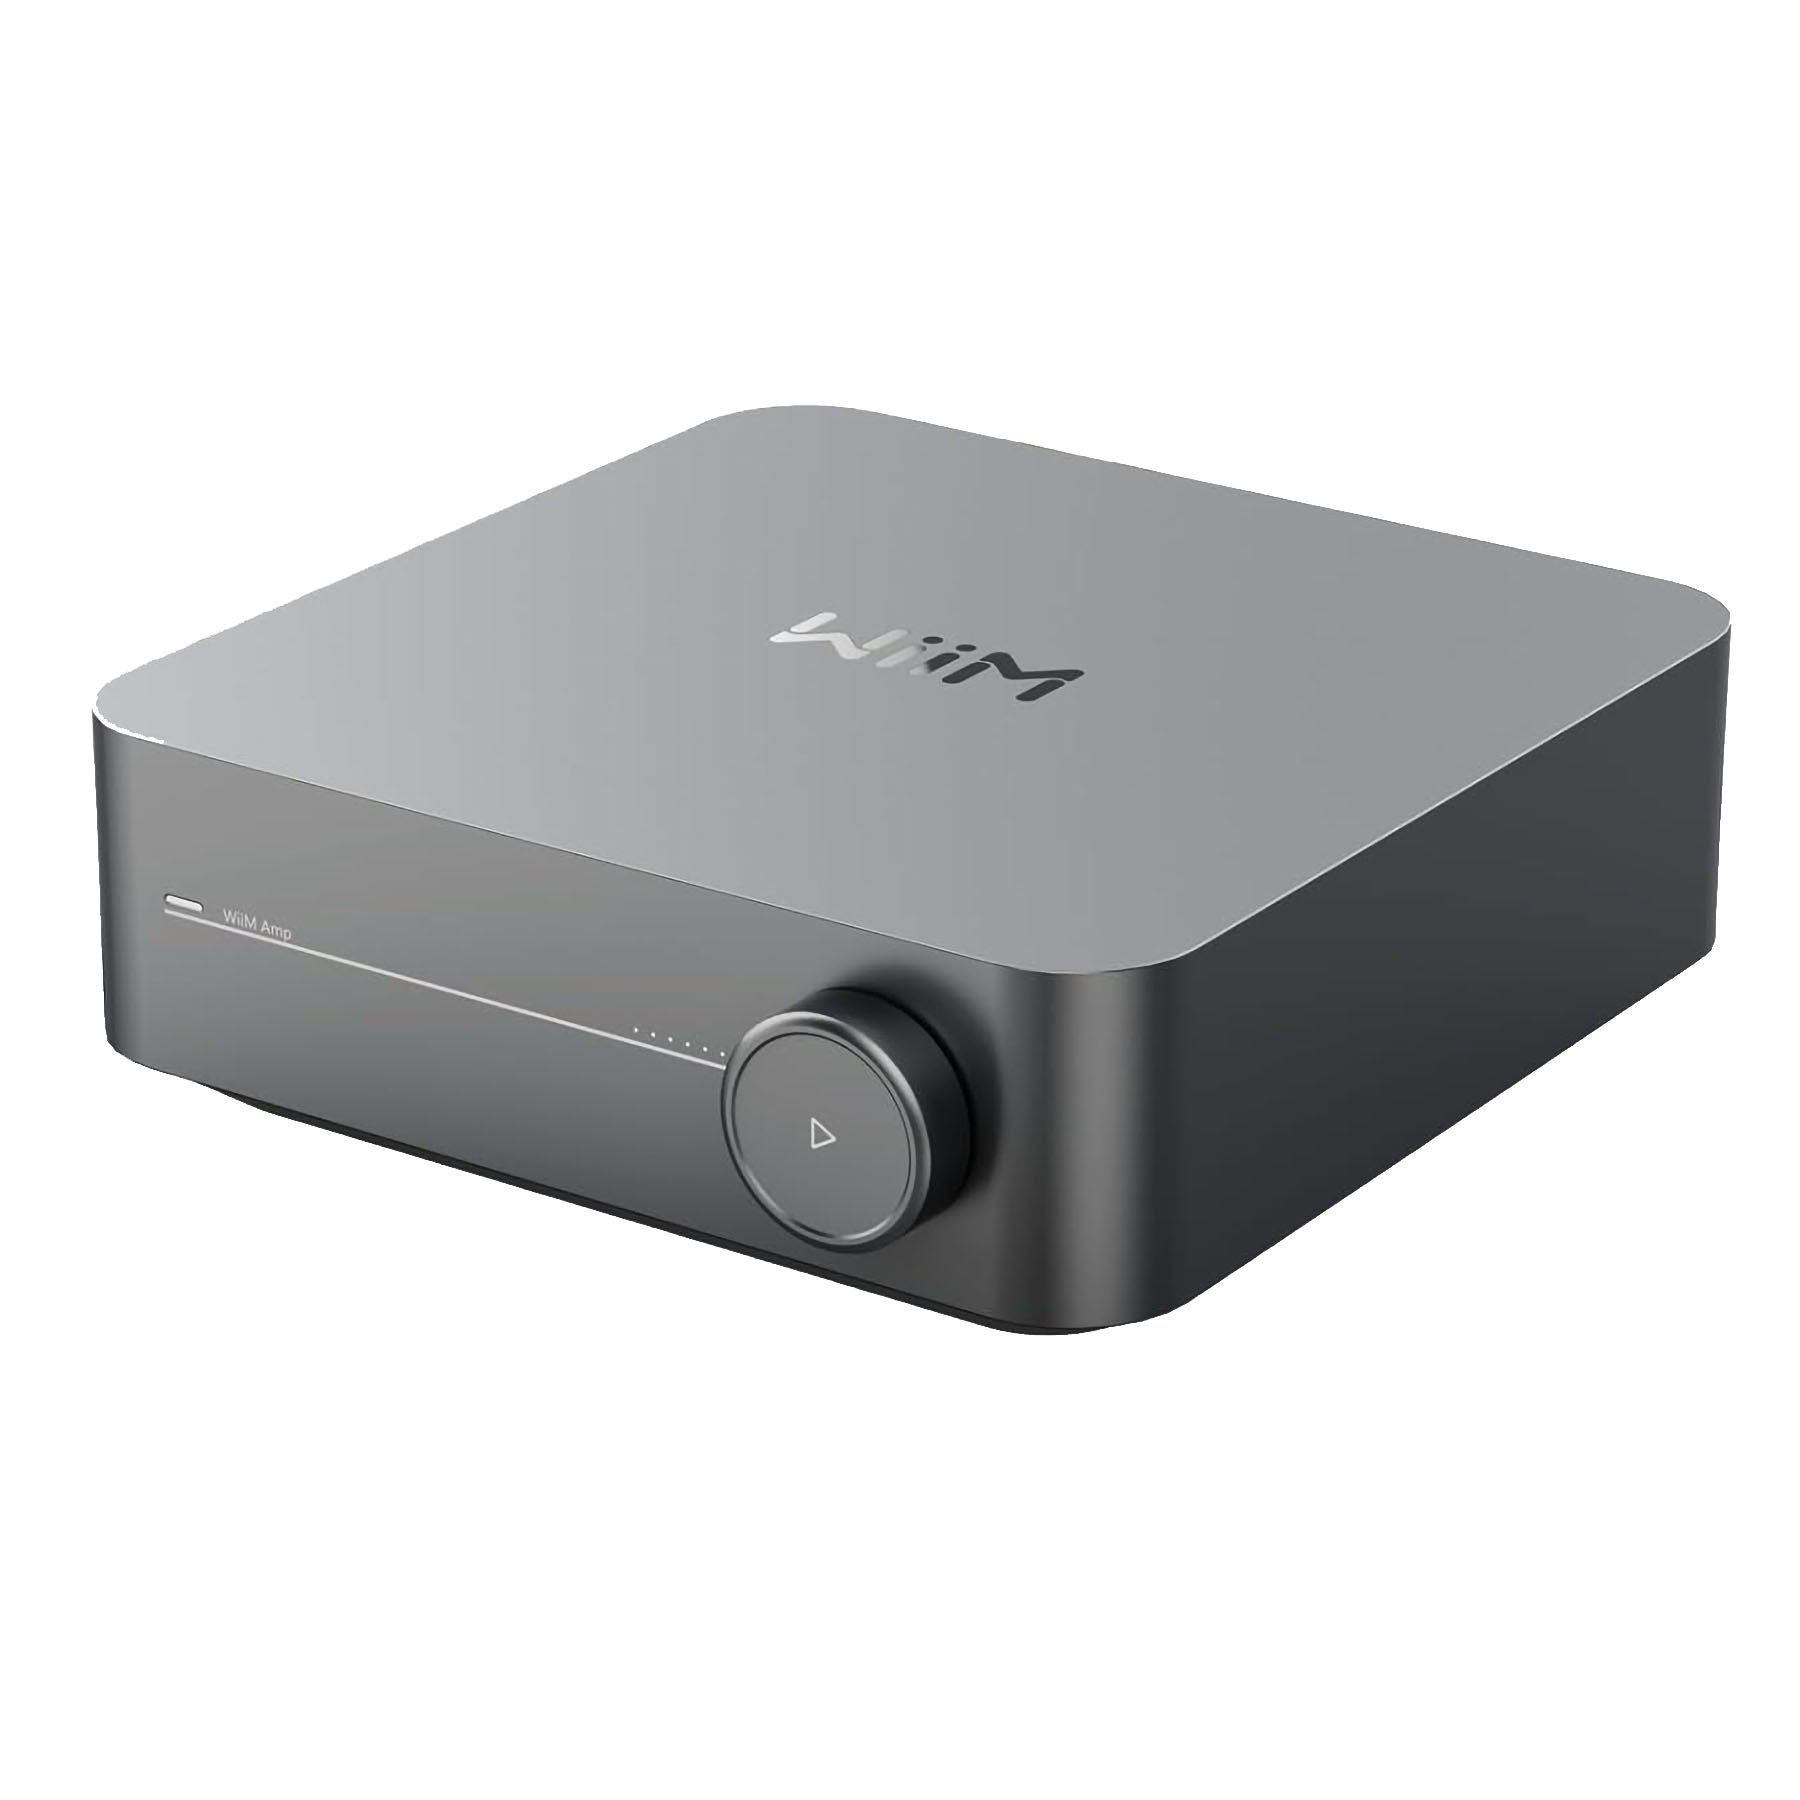 WiiM Amp WiiM Amp Multiroom Stereo Streaming Amplifier with AirPlay 2, Chromecast, HDMI & Voice Control - Space Grey